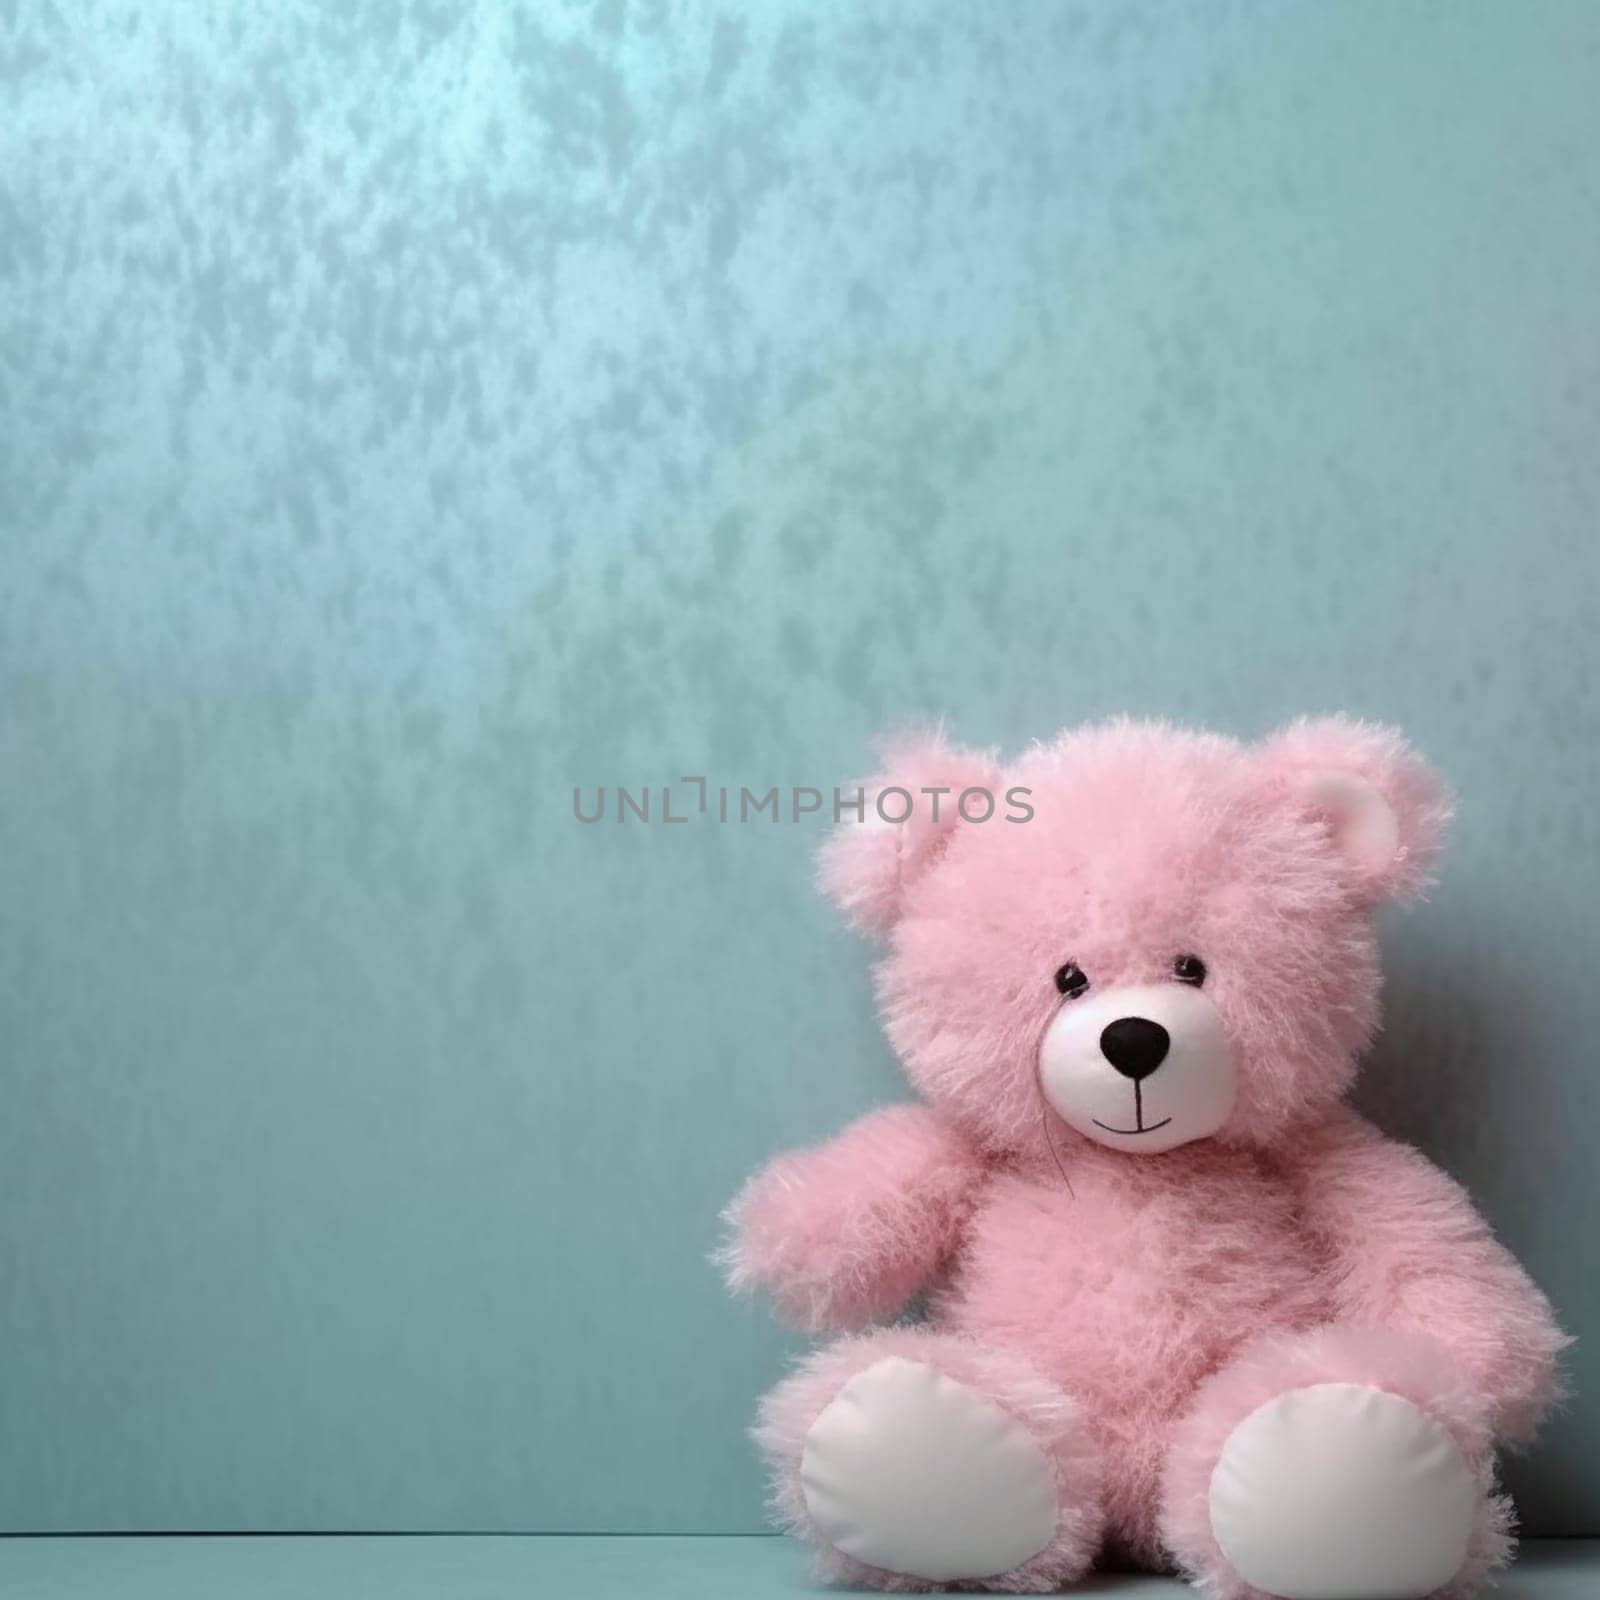 A pink teddy bear sitting against a blue textured background.